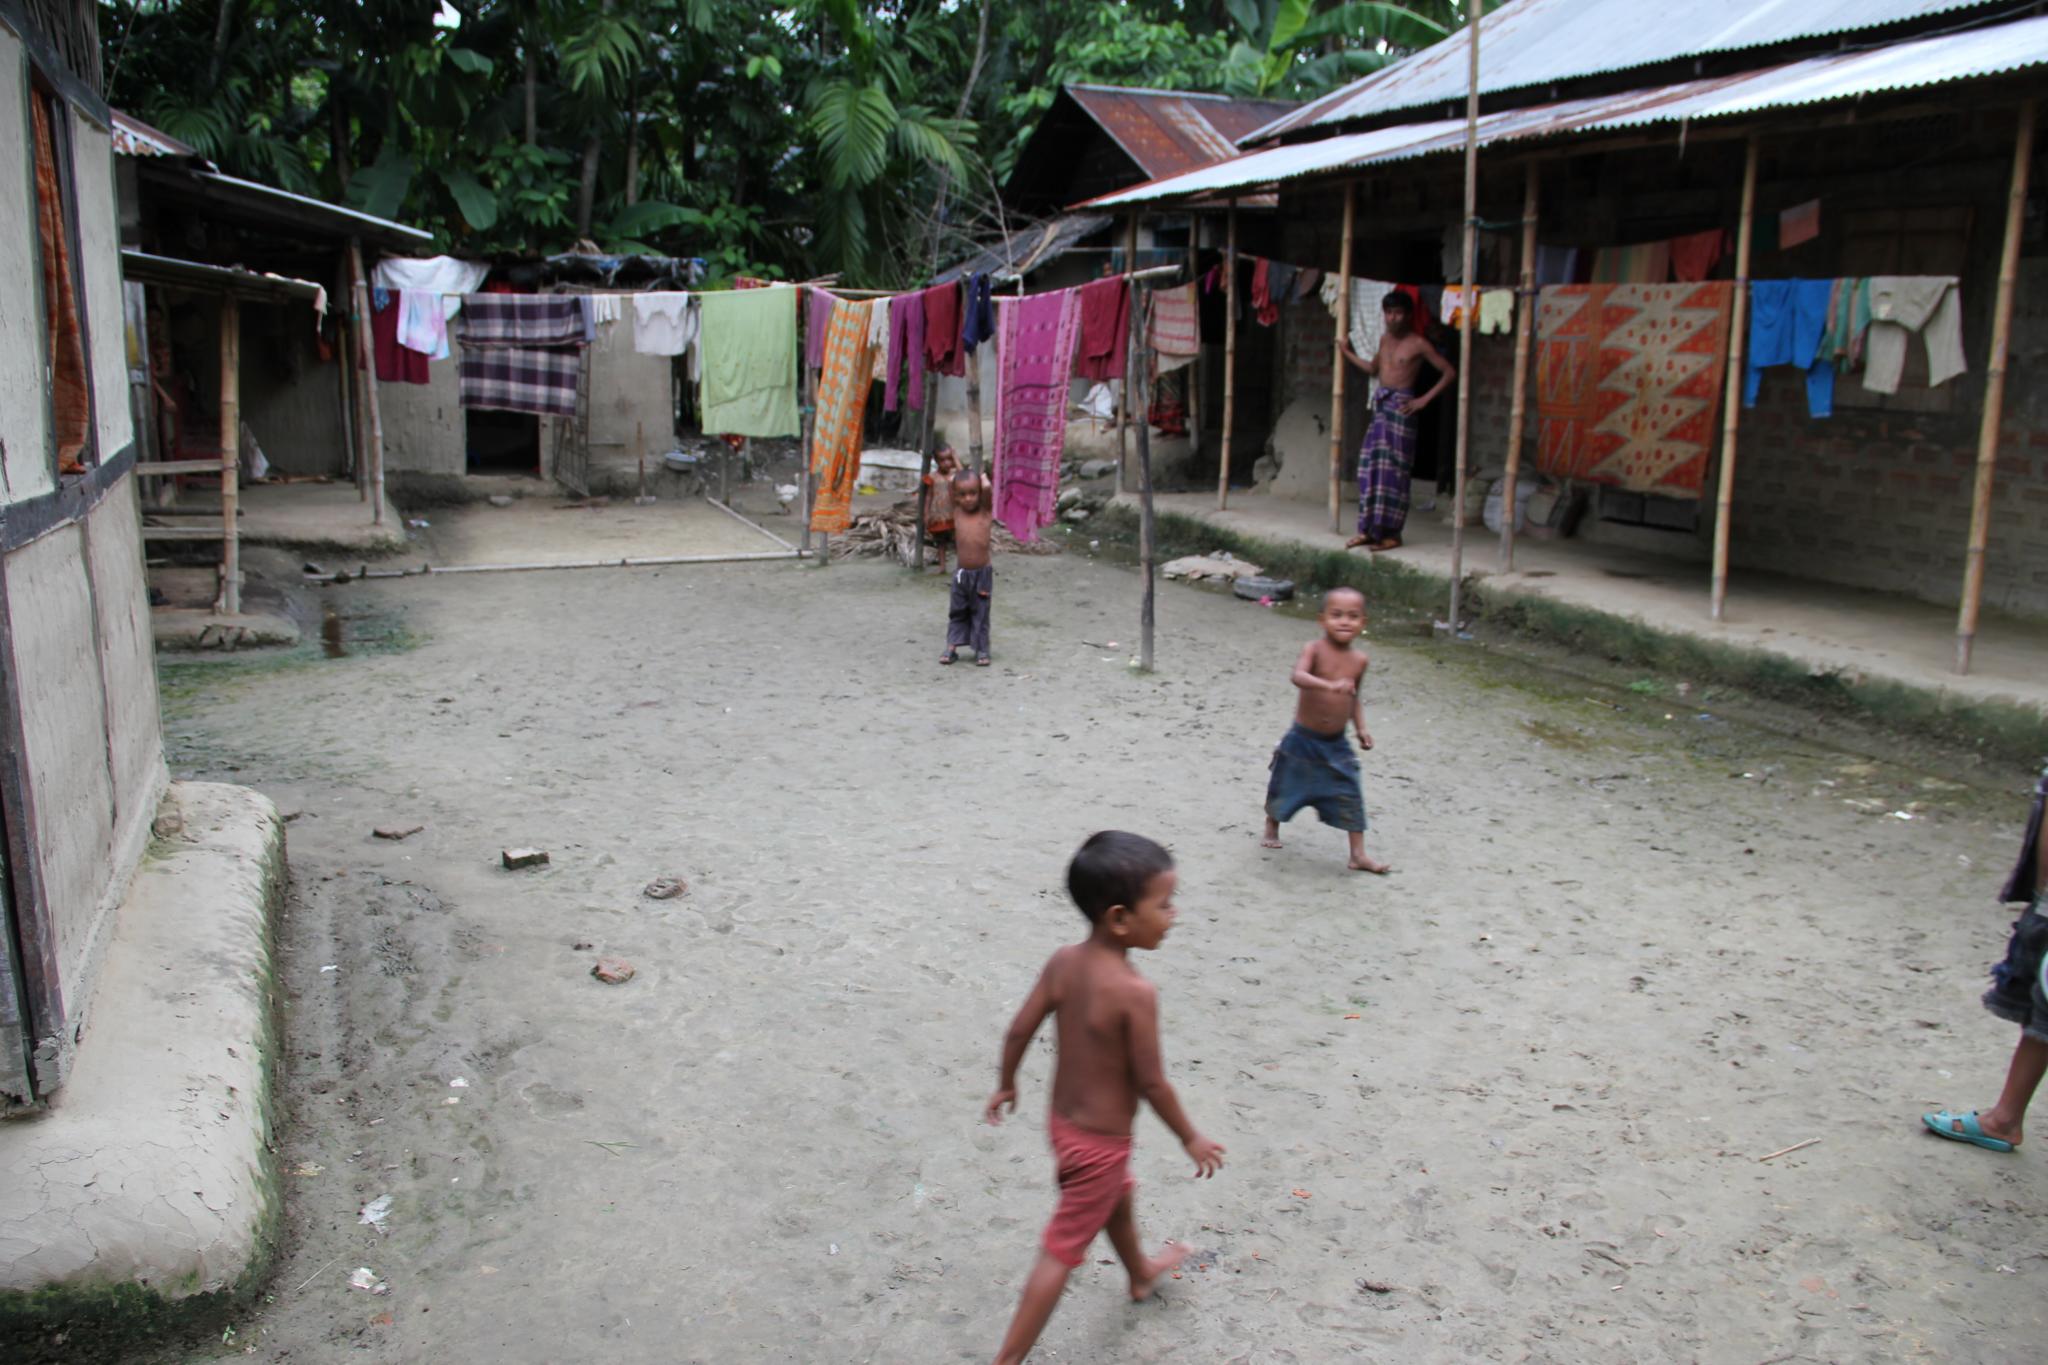 children are playing ball in an outside town